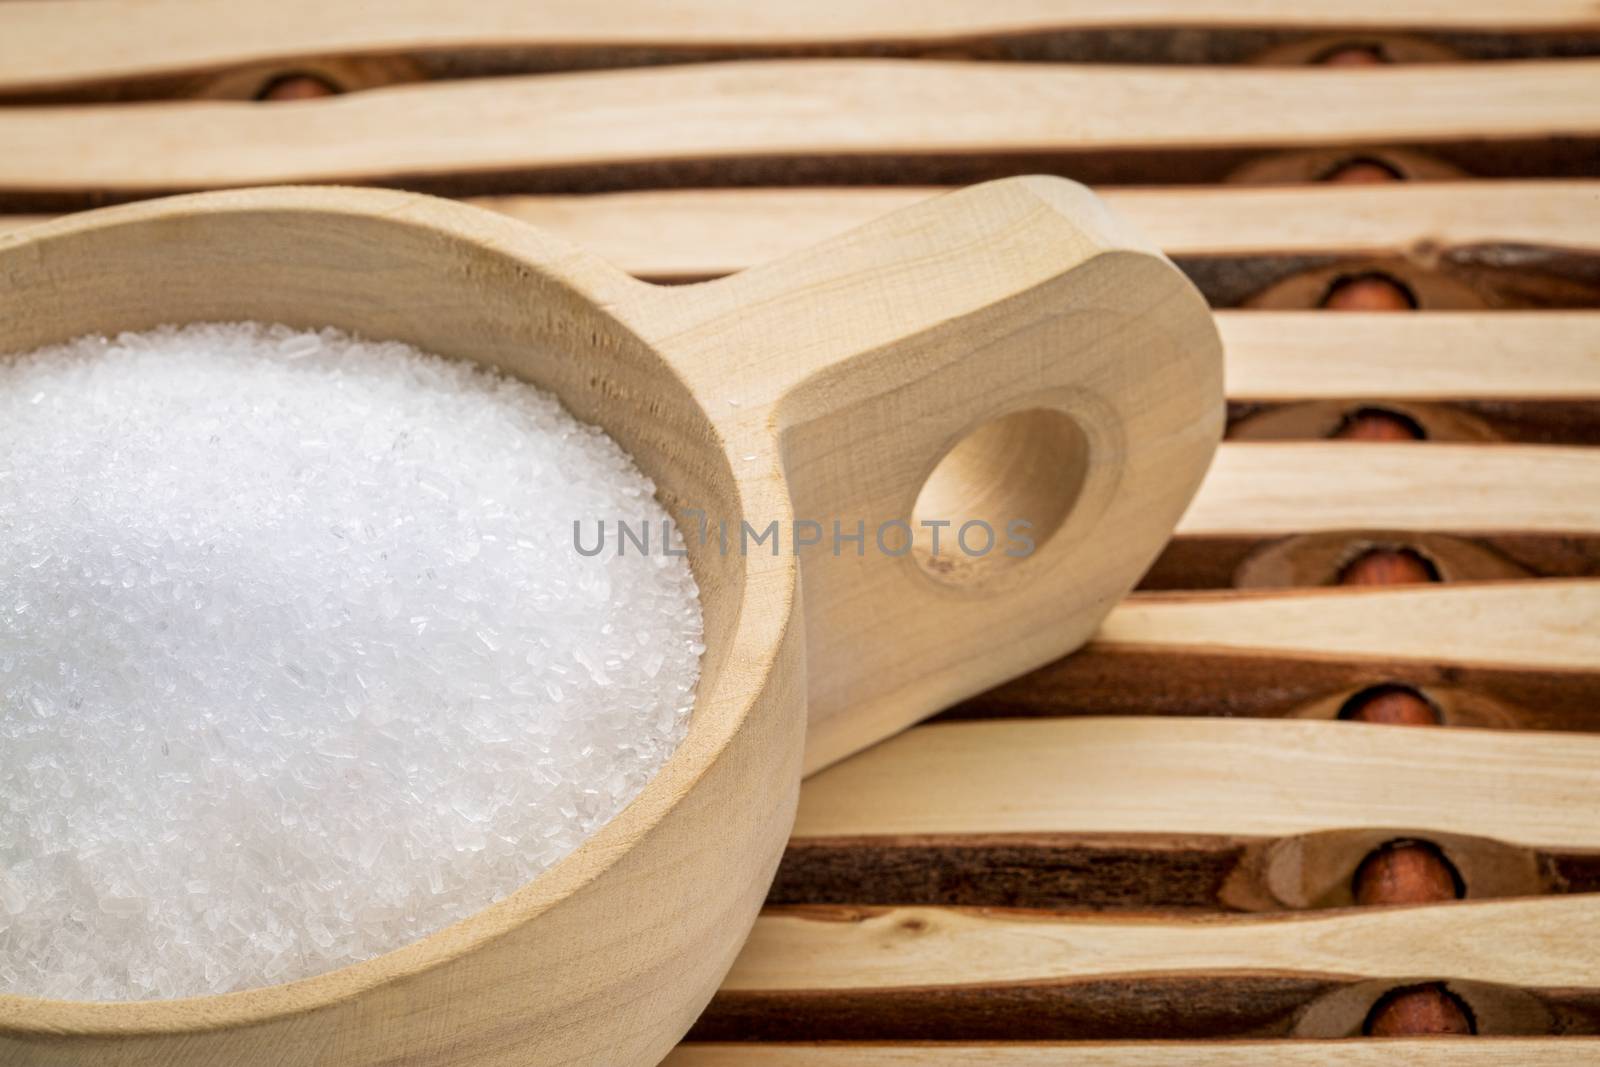 Magnesium sulfate (Epsom salts) in a rustic wooden scoop - relaxing bath concept